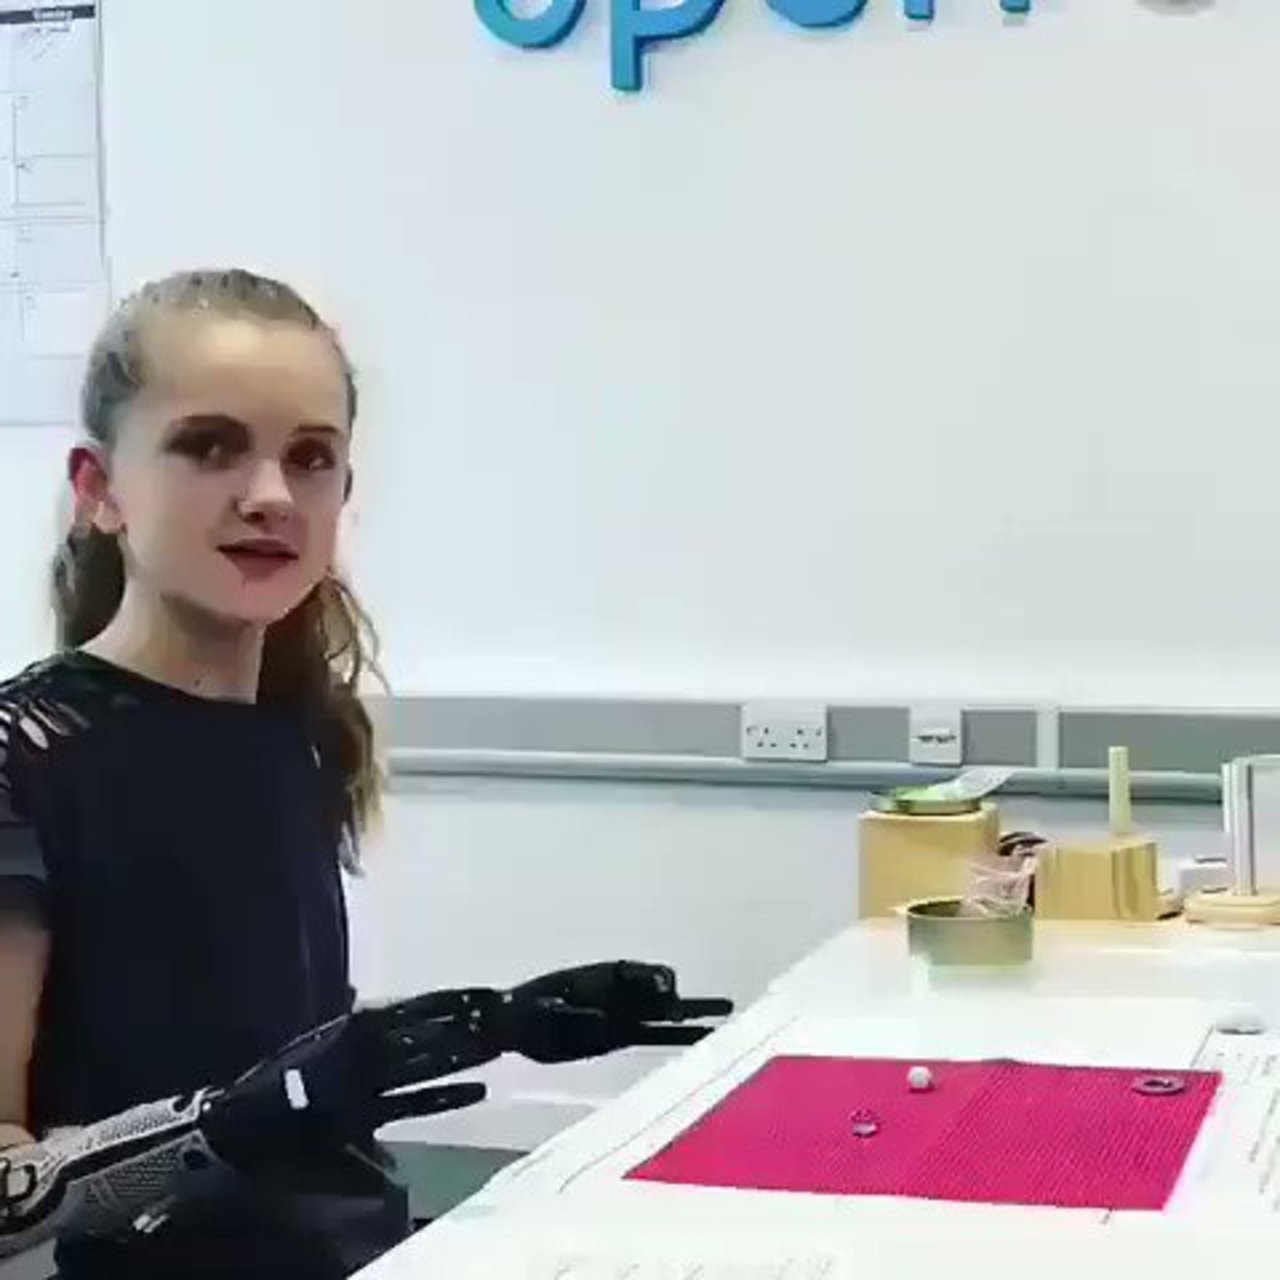 "These hands are going to change my life", Tilly lost her arms as a baby and she has two hero arms. By @openbionics  #Robotics #Innovation #Healthtech #ArtificialIntelligence #Engineering #MachineLearning #IoT  Cc: @GlenGilmore @IrmaRaste @evankirstel @techpearce2 @mvollmer1 https://t.co/diZJCmyesf